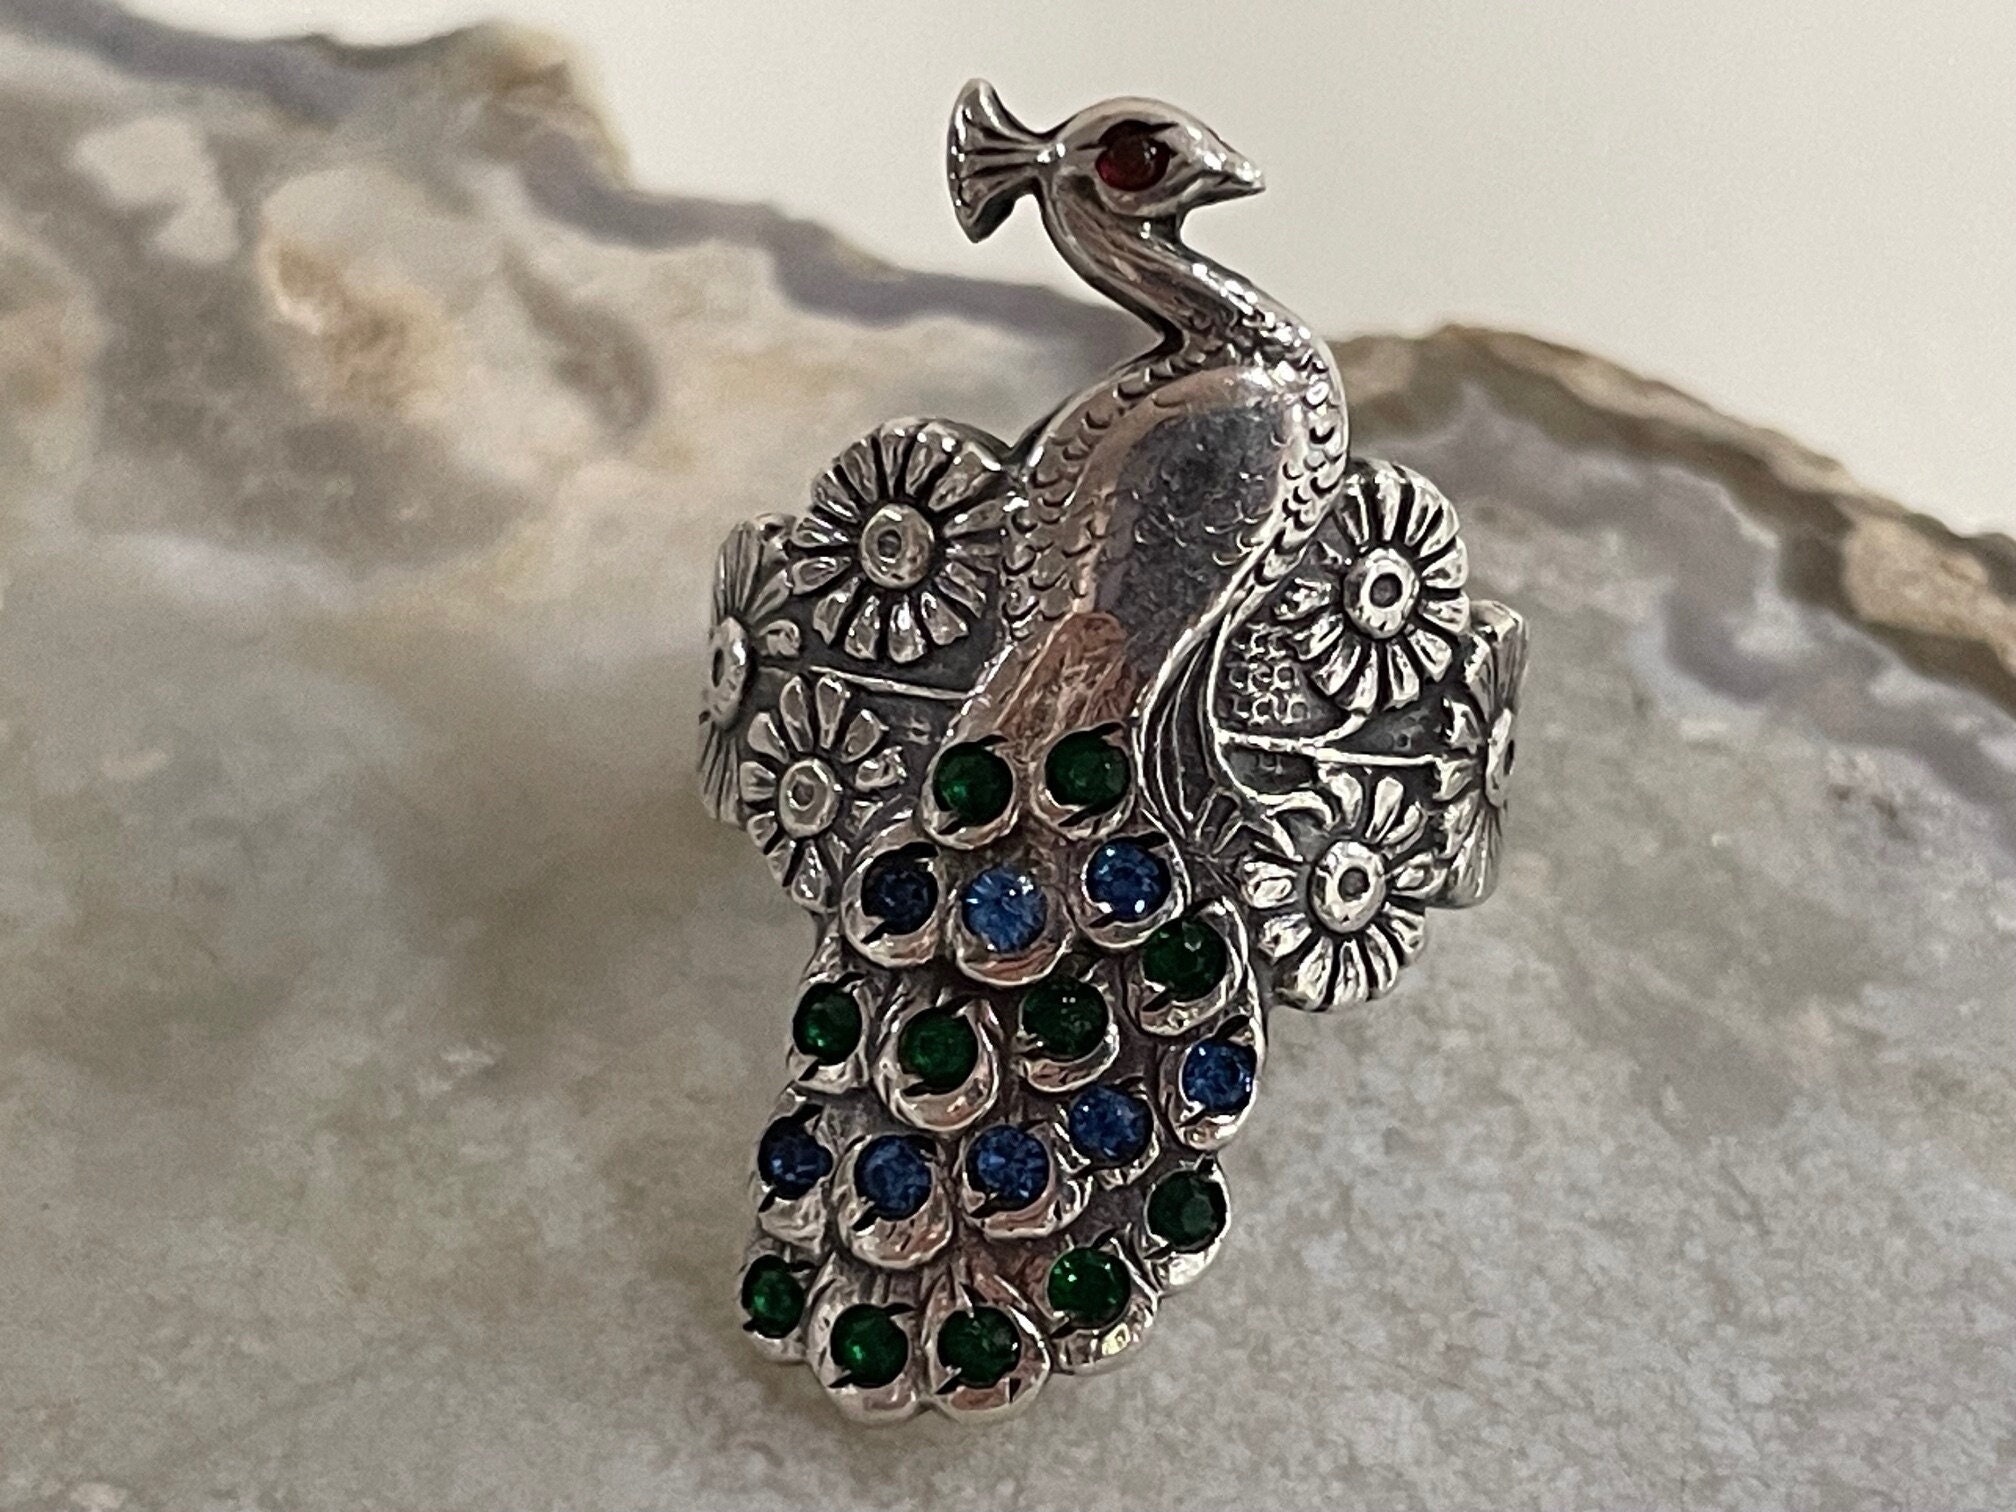 Amazon.com: RMREWY 925 Sterling Silver Peacock Ring Dainty Peacock Wrap Ring  Peacock Jewelry Christmas Gifts for Women Mom Girlfriend, Size 6: Clothing,  Shoes & Jewelry